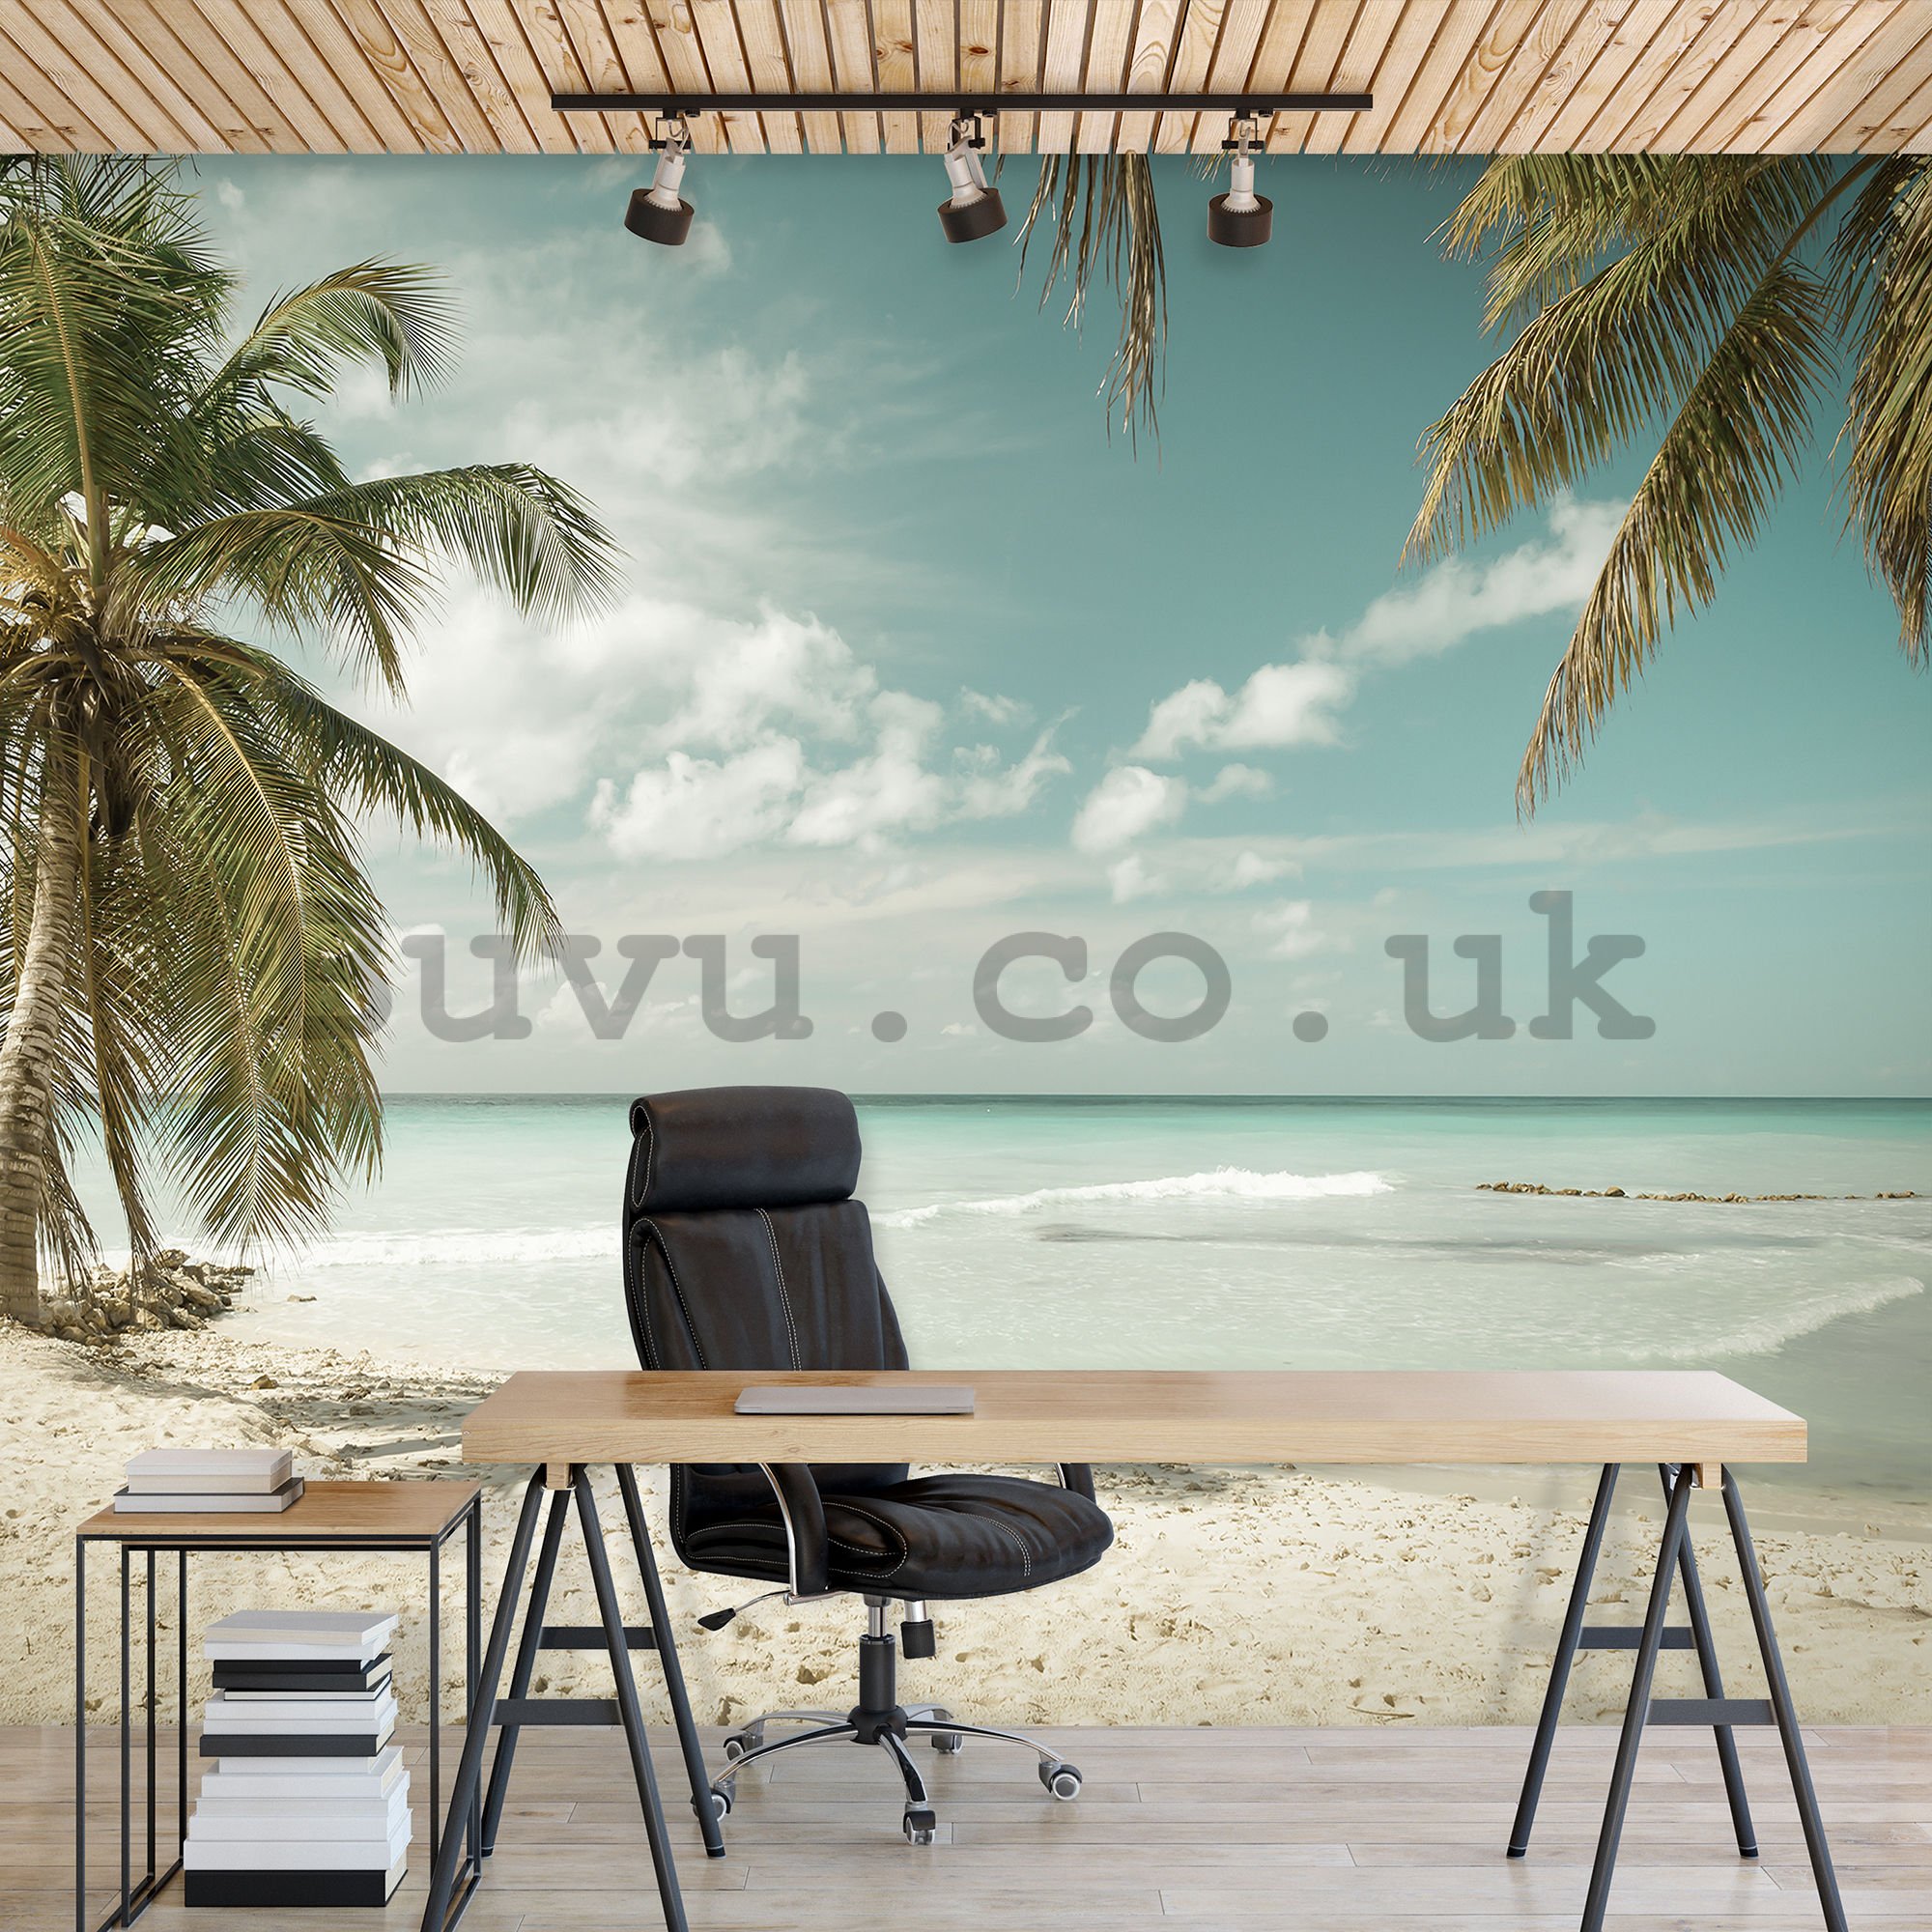 Wall mural vlies: Palm trees over the sea - 416x254 cm